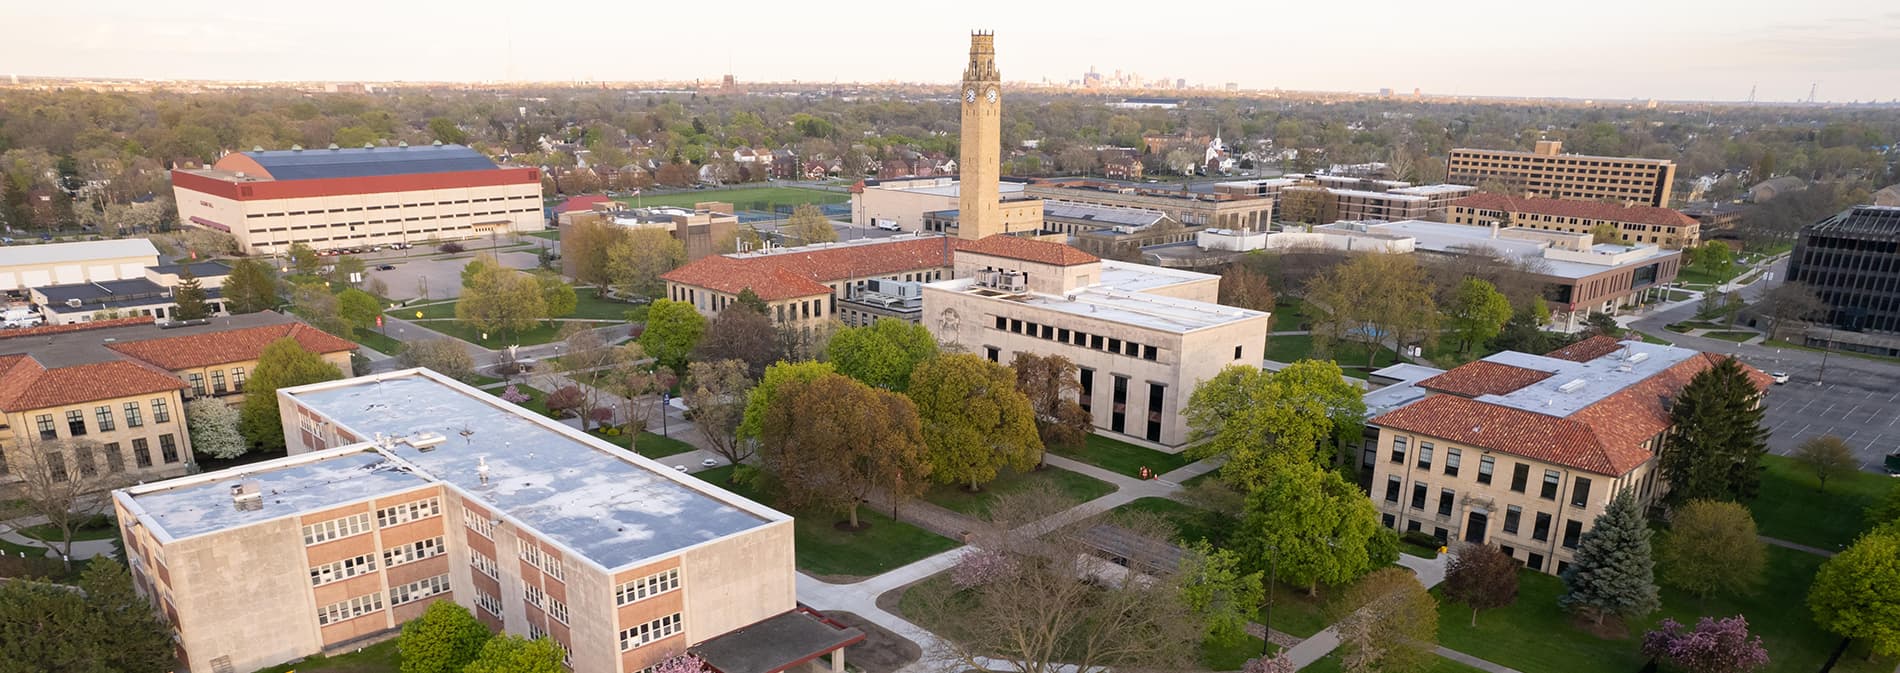 An aerial photograph of ɫۺϾþ Mercy's McNichols Campus, featuring the city of ɫۺϾþ skyline far off in the distance.